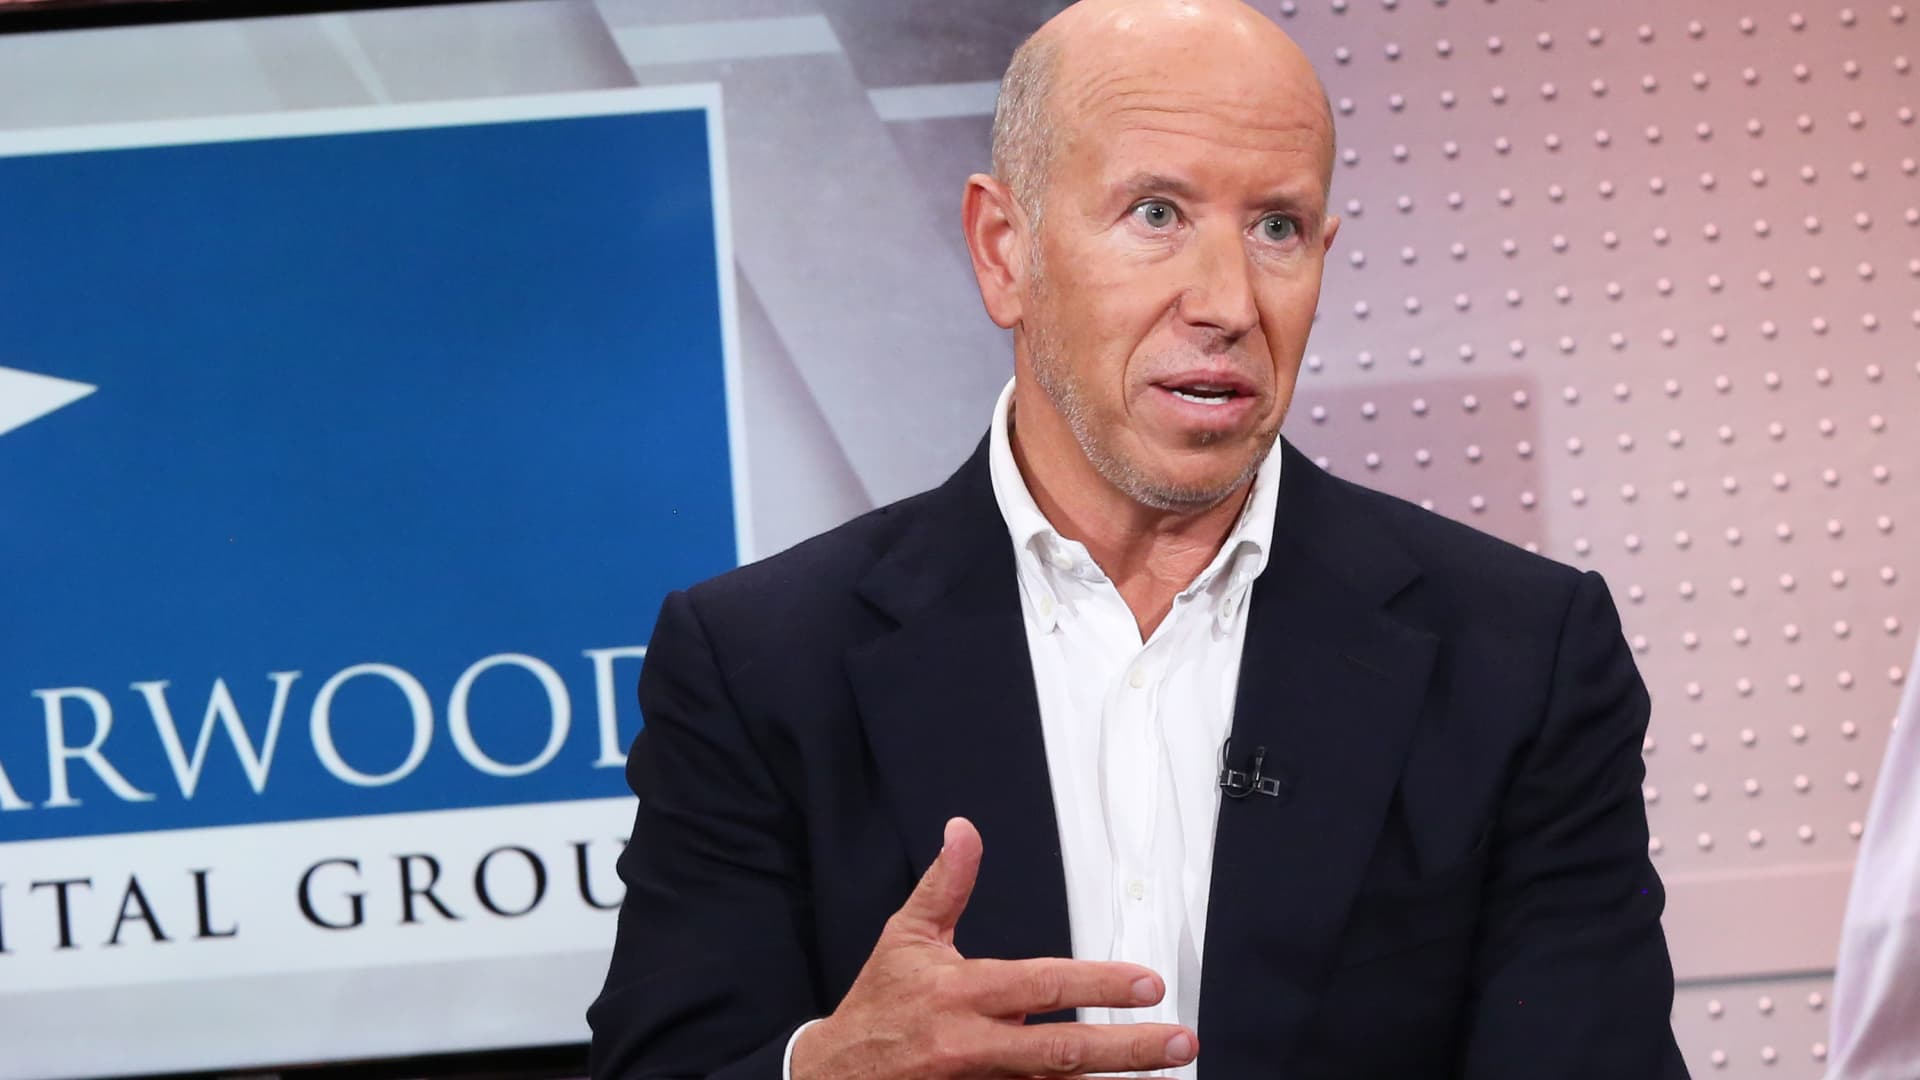 Barry Sternlicht says 'unspeakable calamites' ahead if the Fed keeps hiking